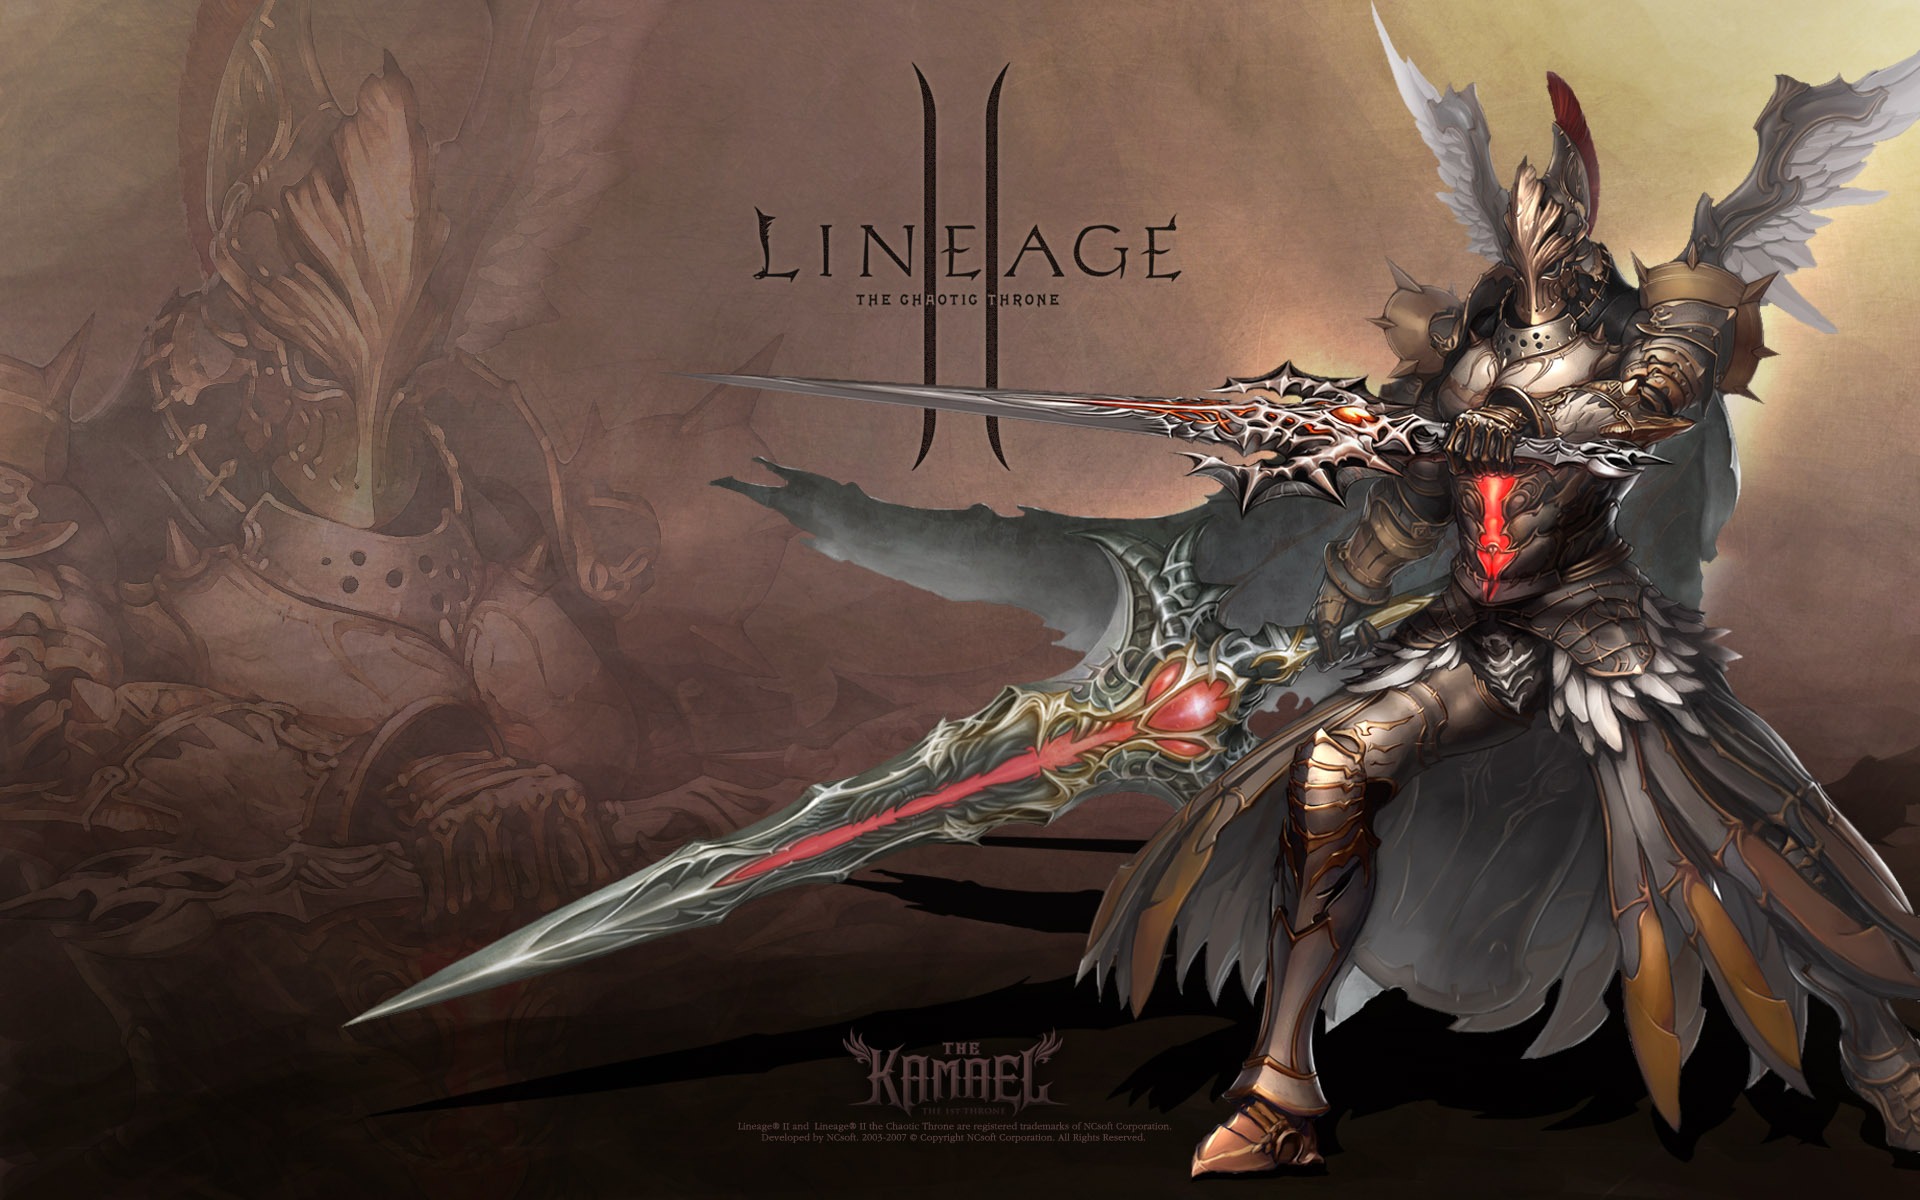 LINEAGE Ⅱ modeling HD gaming wallpapers #9 - 1920x1200